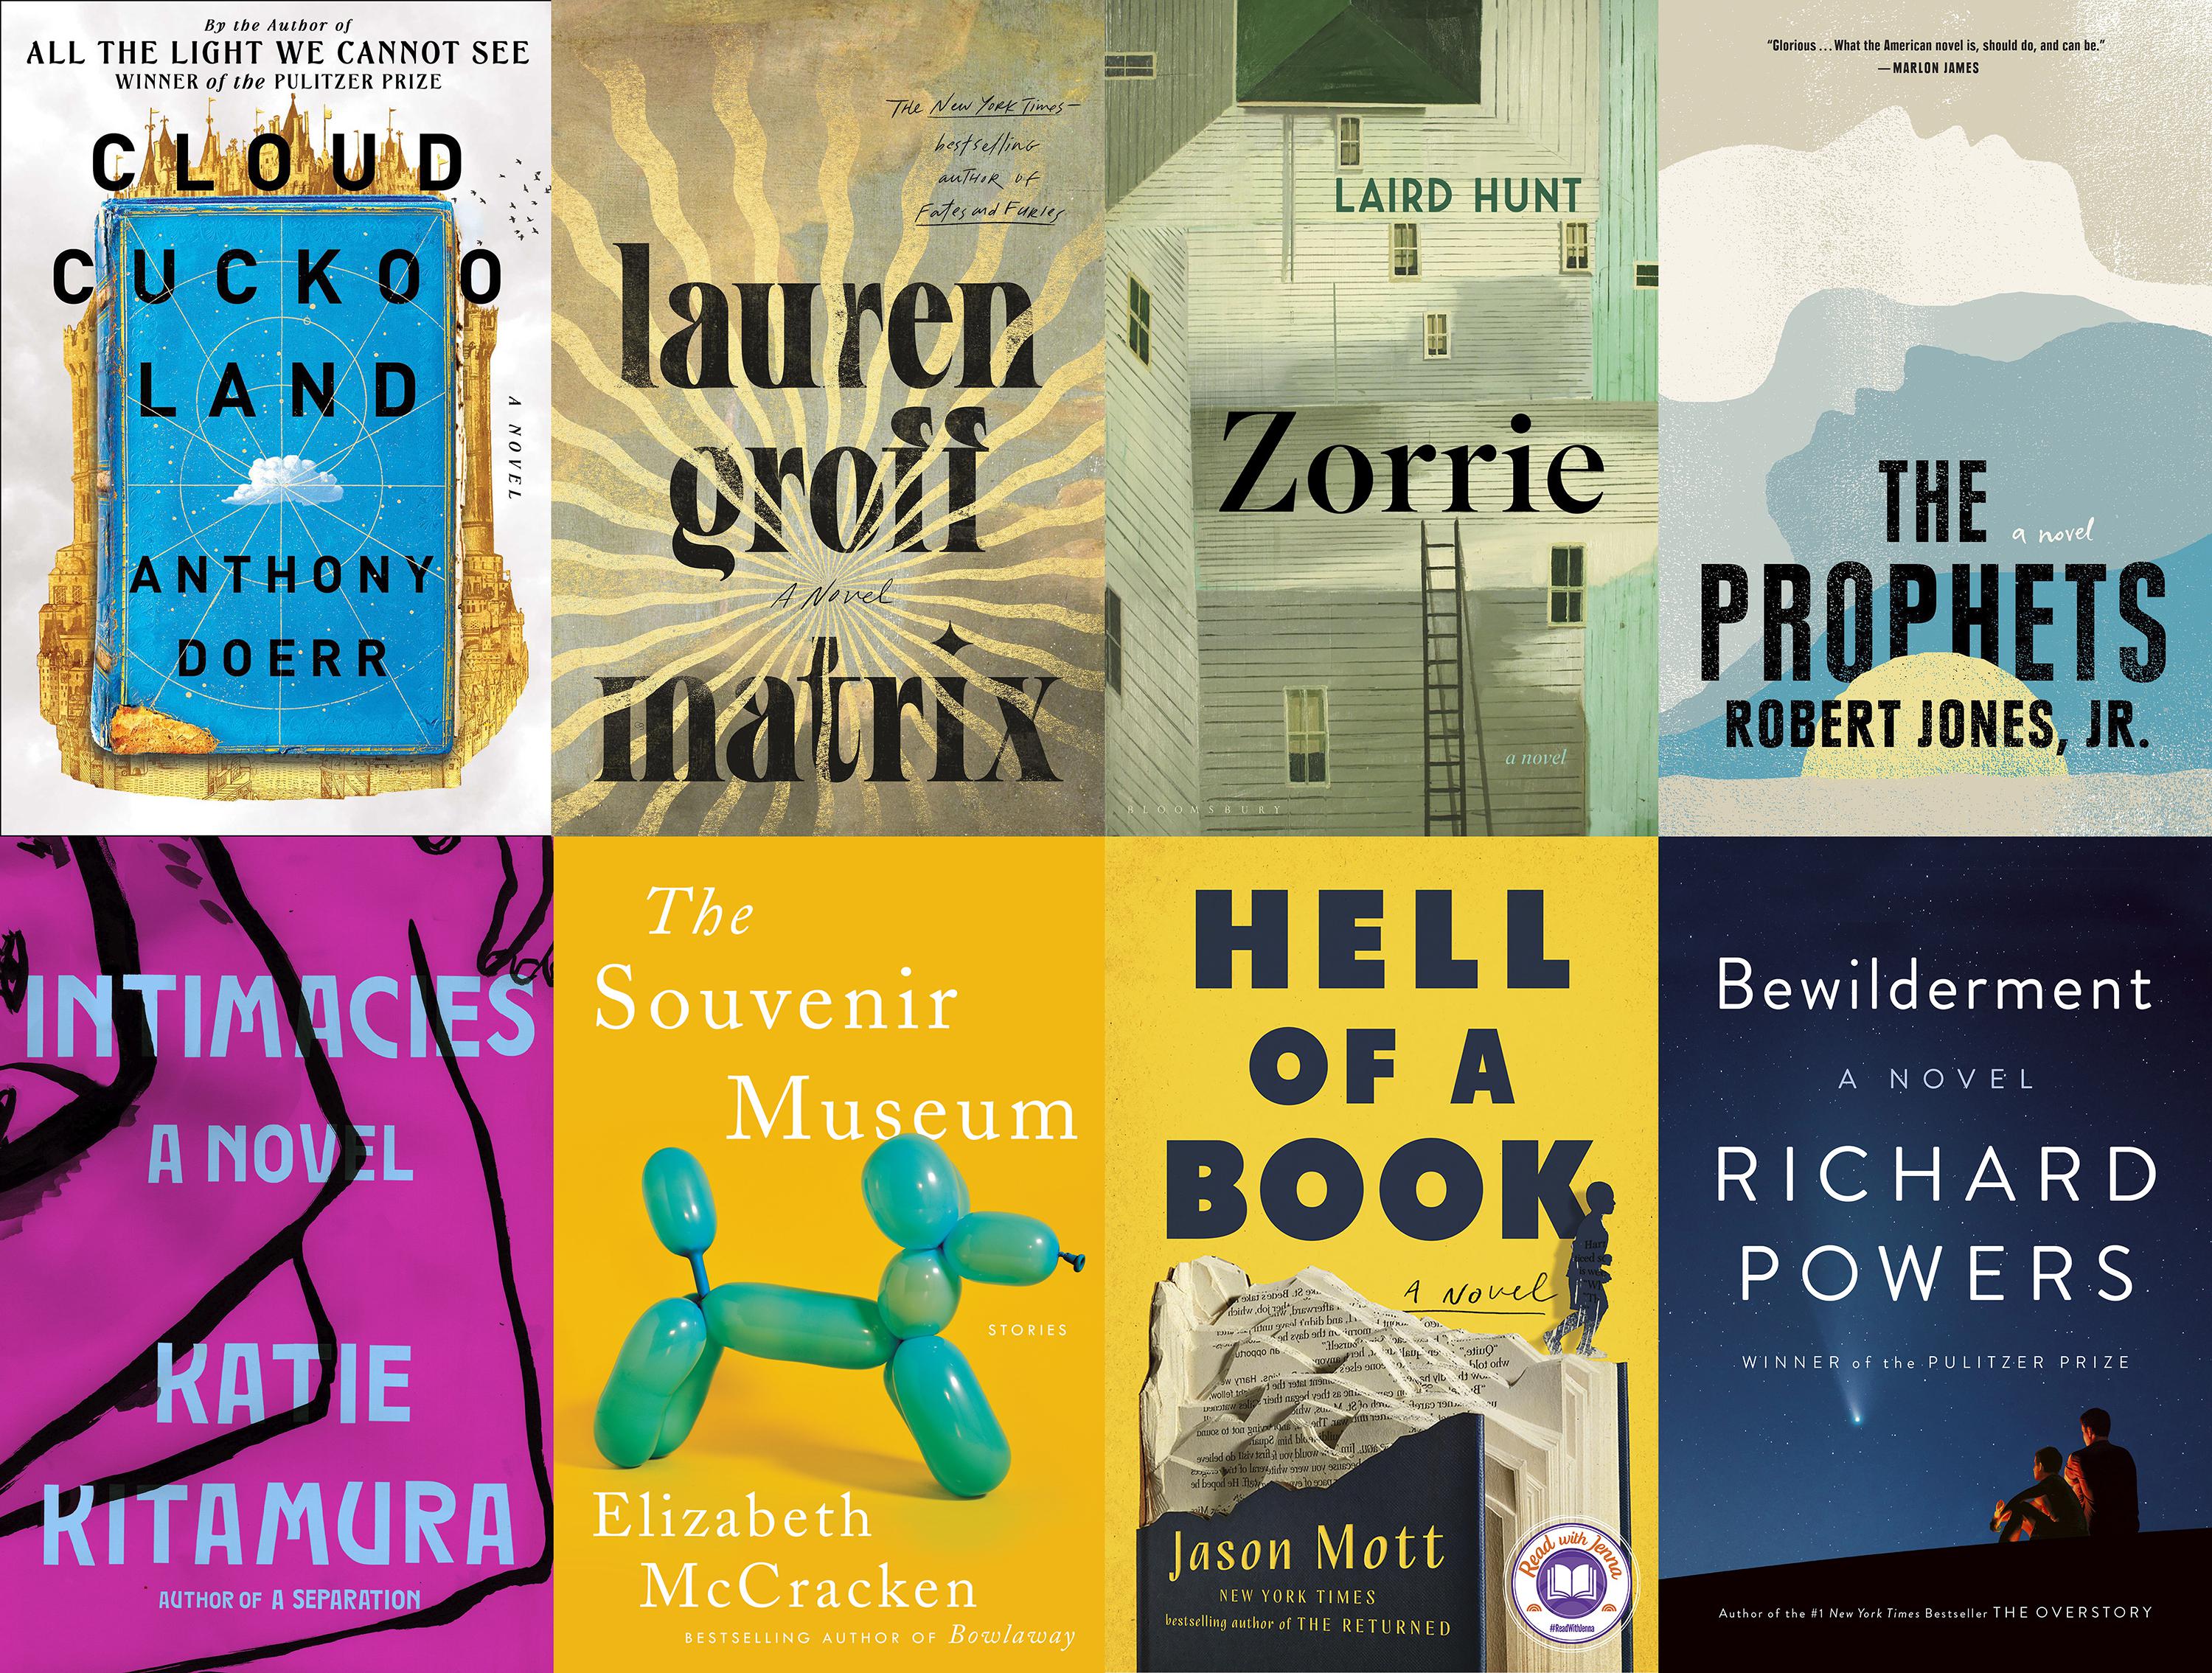 Doerr, Powers on fiction longlist for National Book Awards AP News